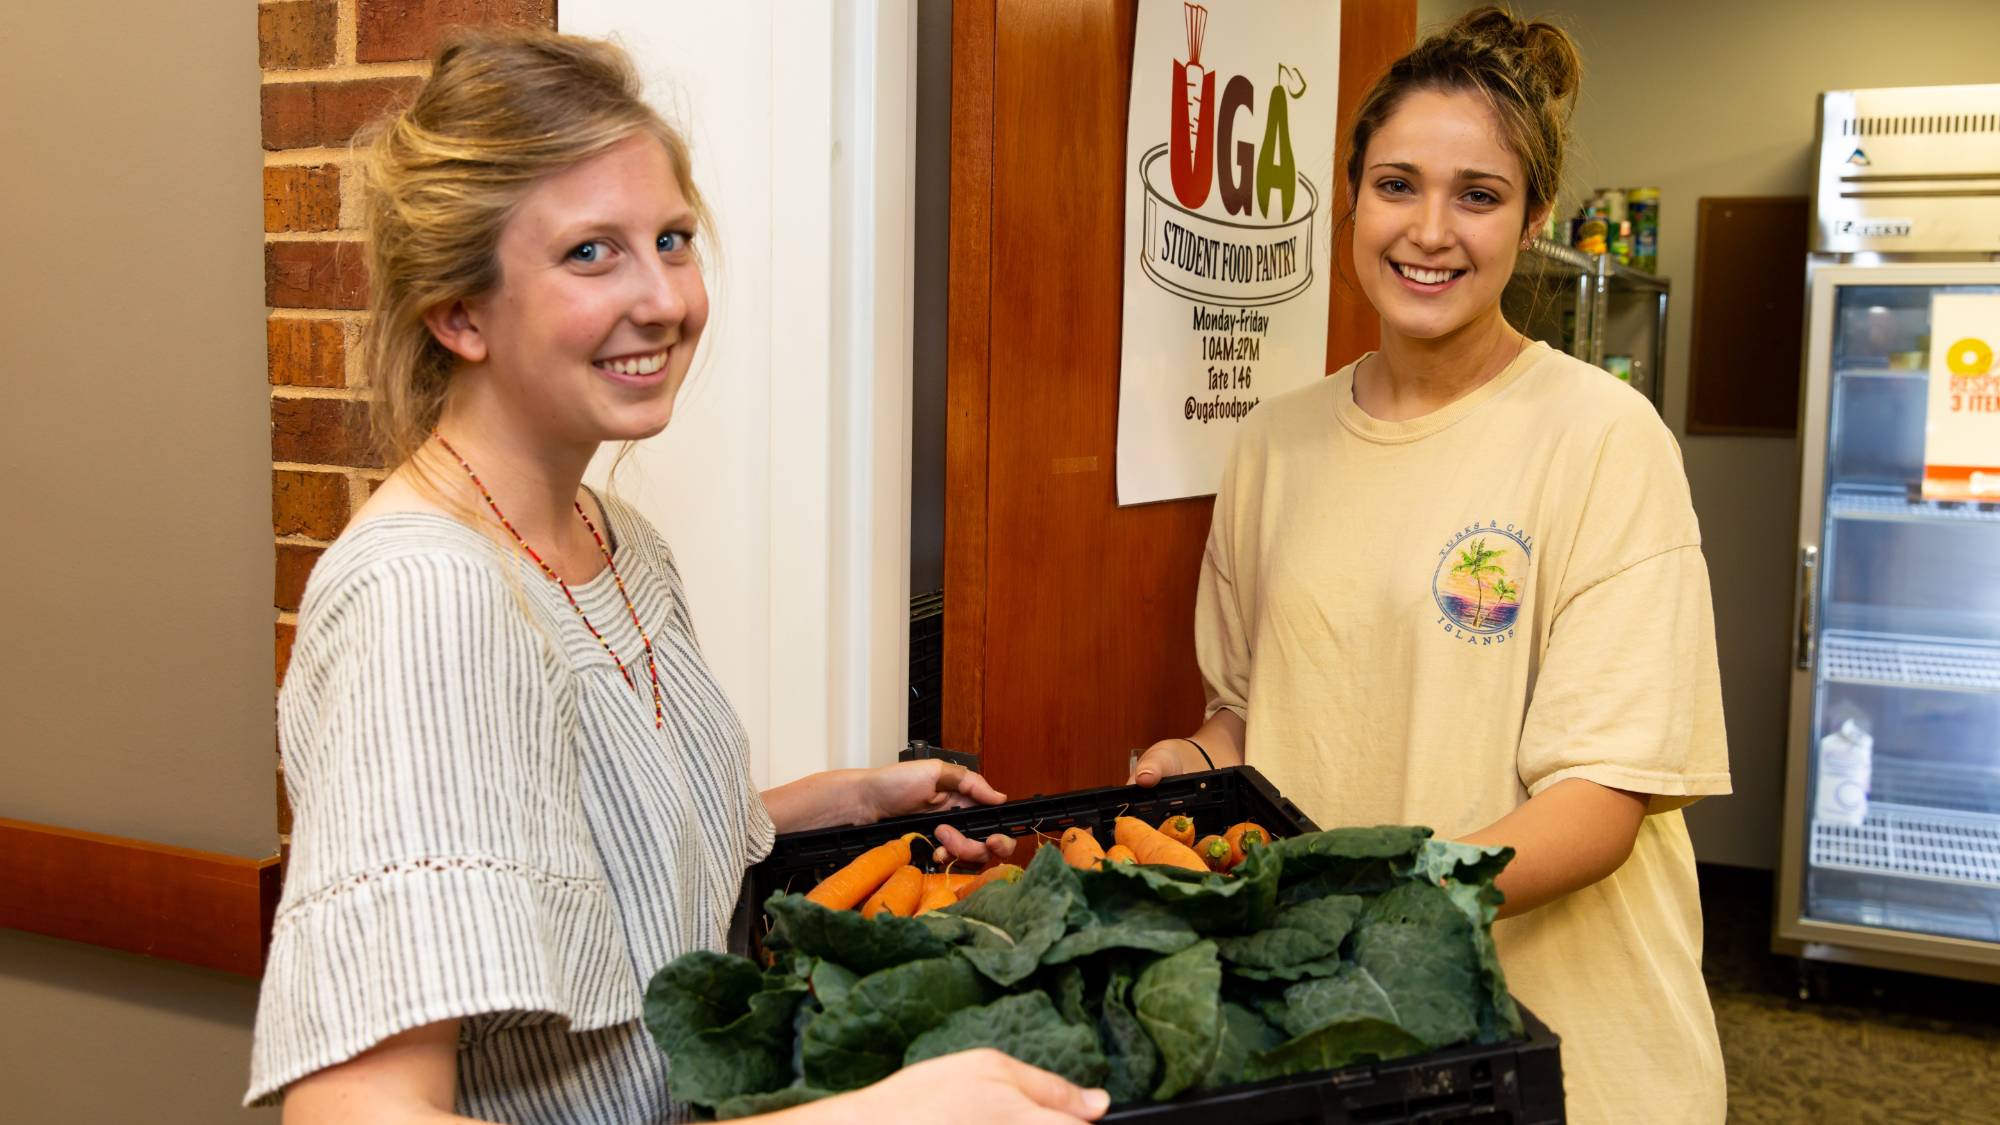 Two young women smile while one hands a tray of fresh vegetables to the other in a doorway labeled UGA Food Pantry